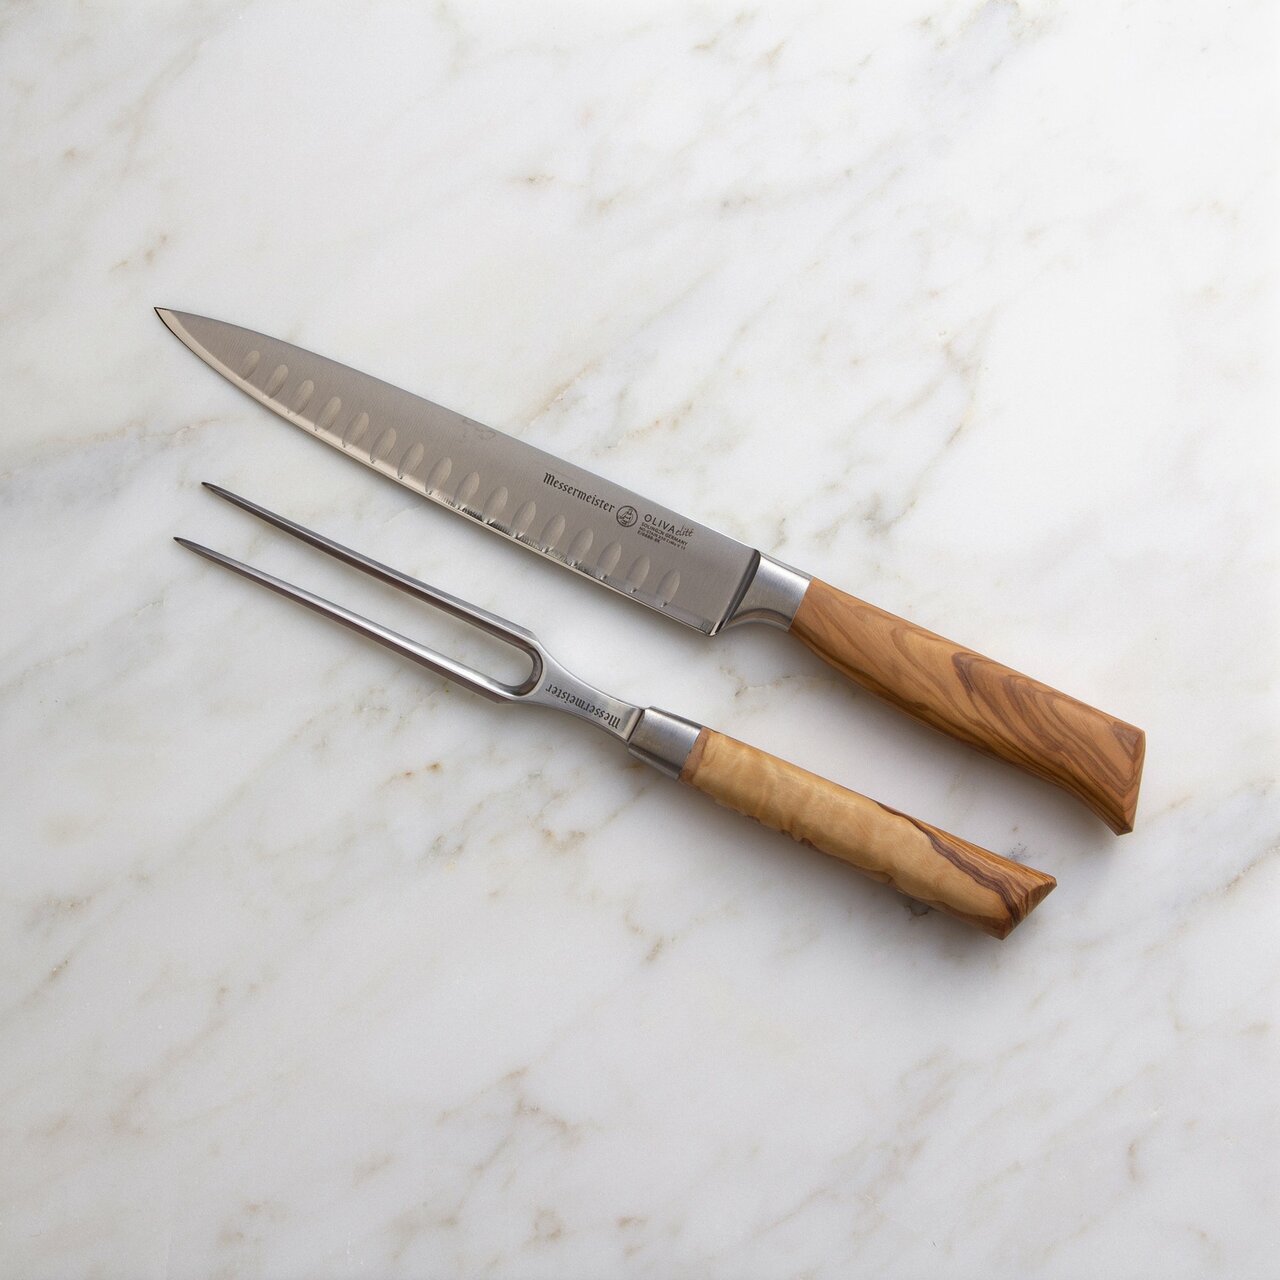 BEON.COM.AU Oliva Elité 2 Piece Kullenschliff Carving Set The Messermeister Oliva Elité Carving Set consists of an 8 Inch Kullenschliff Carving Knife (E6688 8K) and a 6 Inch Straight Carving Fork (E6805 6).This is the perfect addition to your cutlery collection. Impress your guests by carving large roasts an... Messermeister at BEON.COM.AU